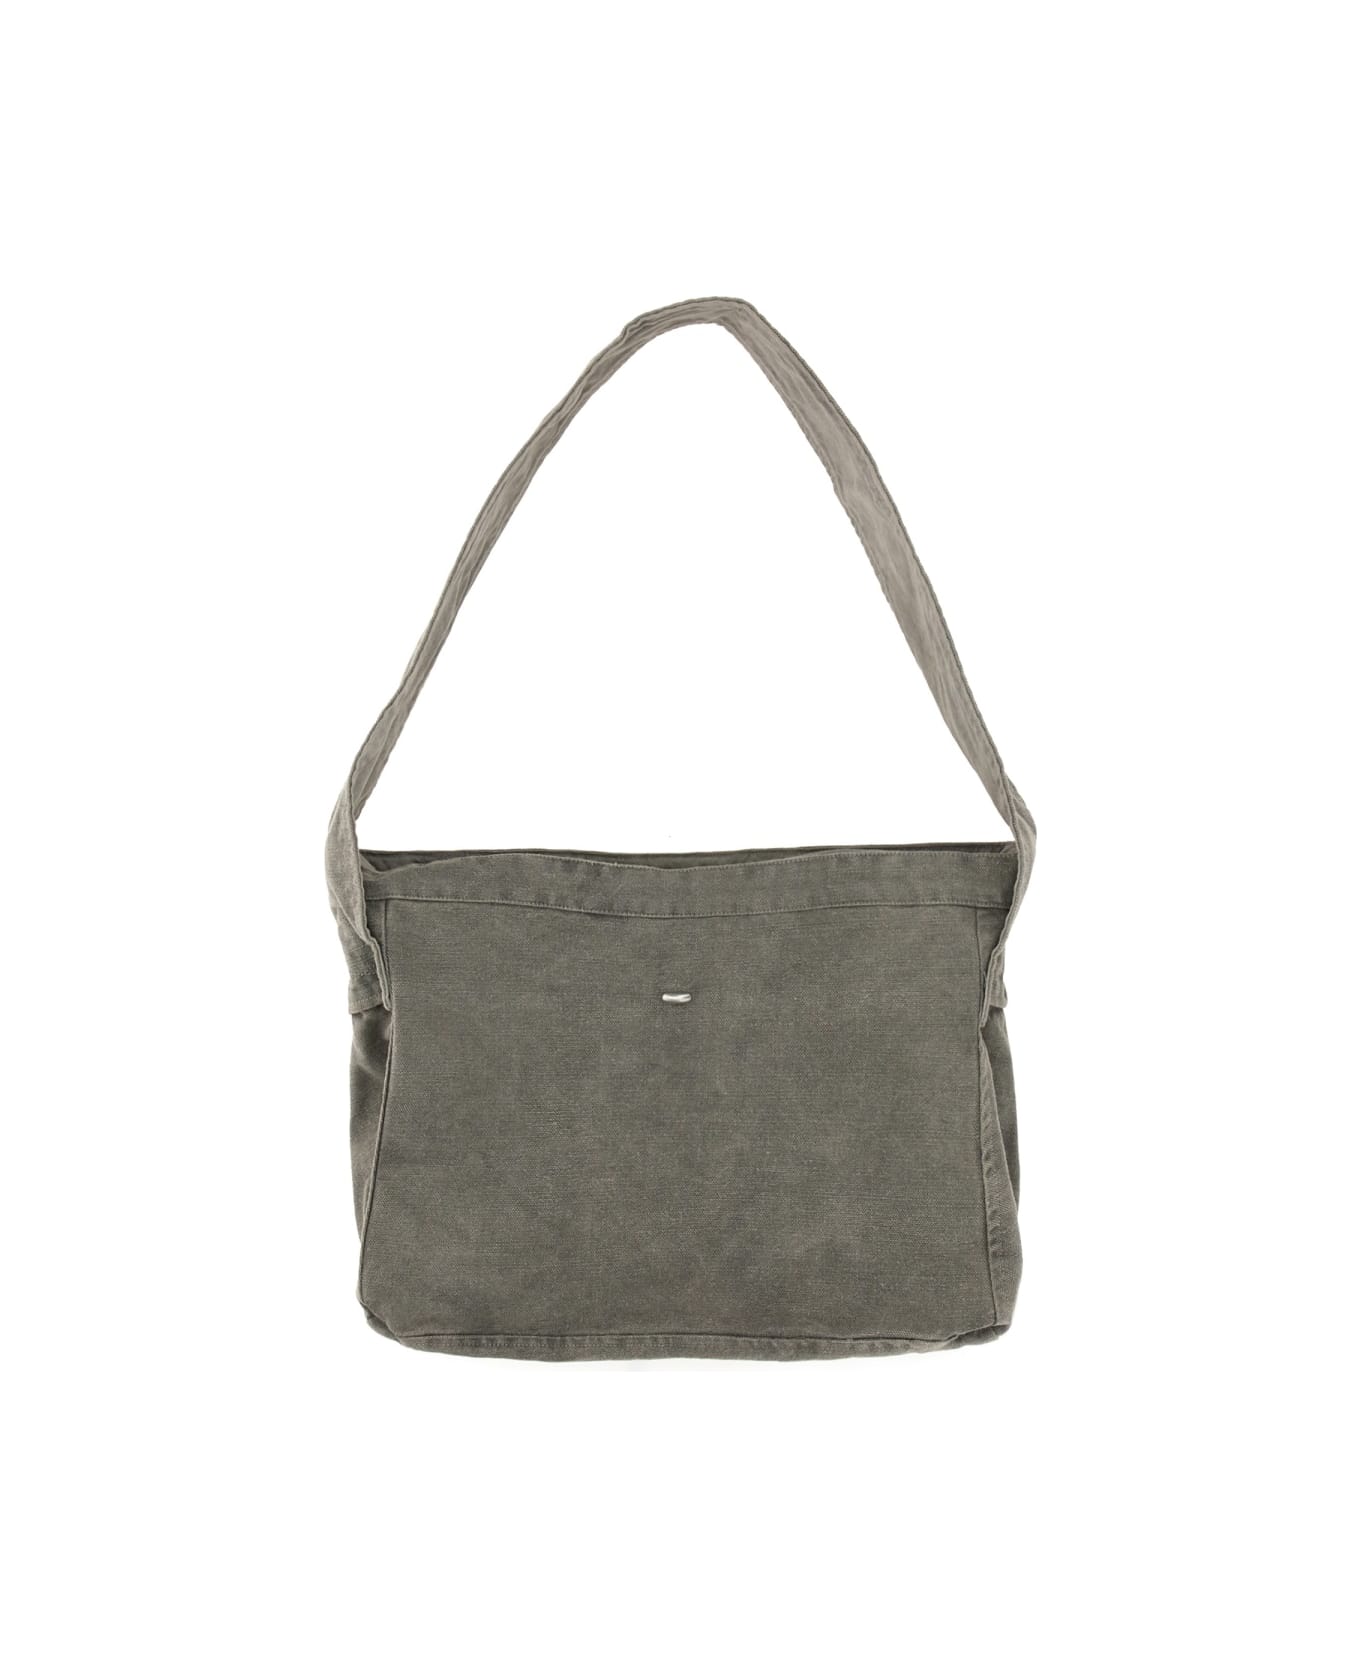 Our Legacy Bag "ship" - GREY トートバッグ